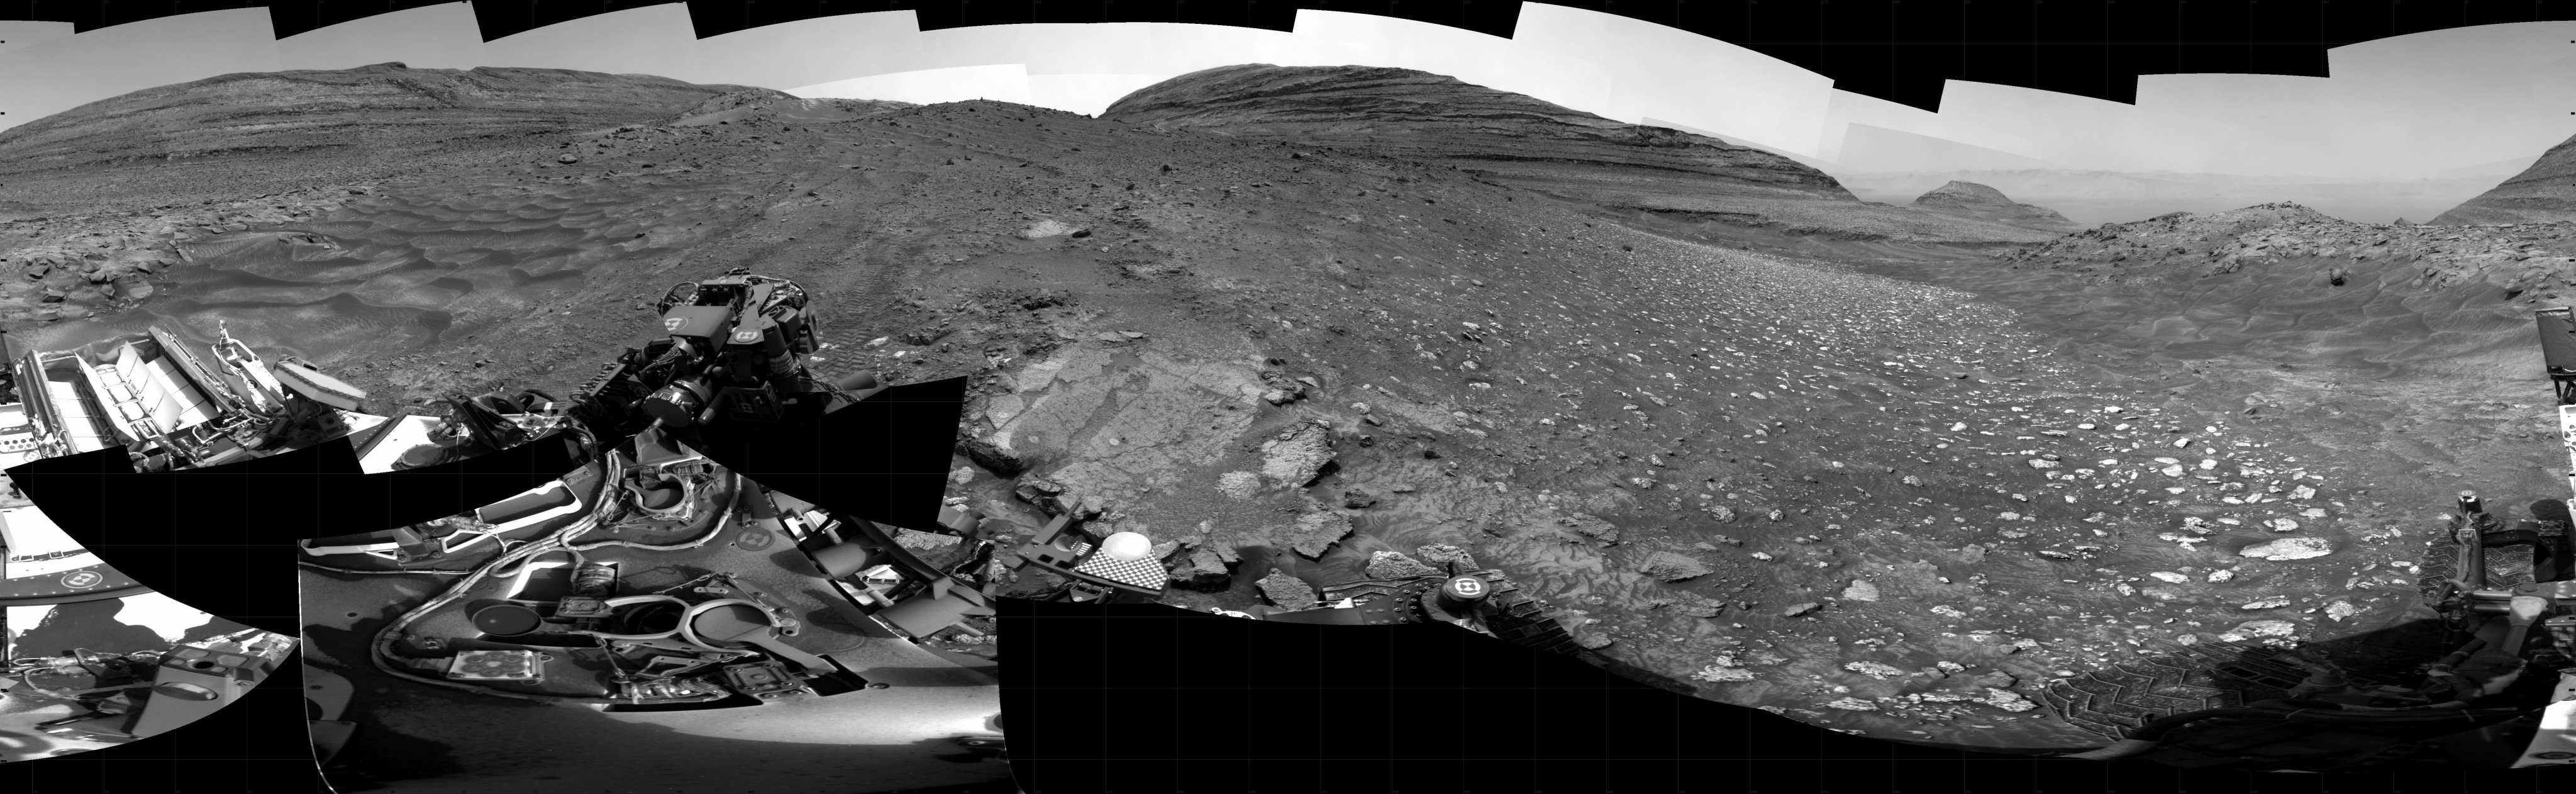 Curiosity took the images on June 26, 2024, Sols 4210-4226 of the Mars Science Laboratory mission at drive 2496, site number 107. The local mean solar time for the image exposures was from 1 PM to 4 PM.